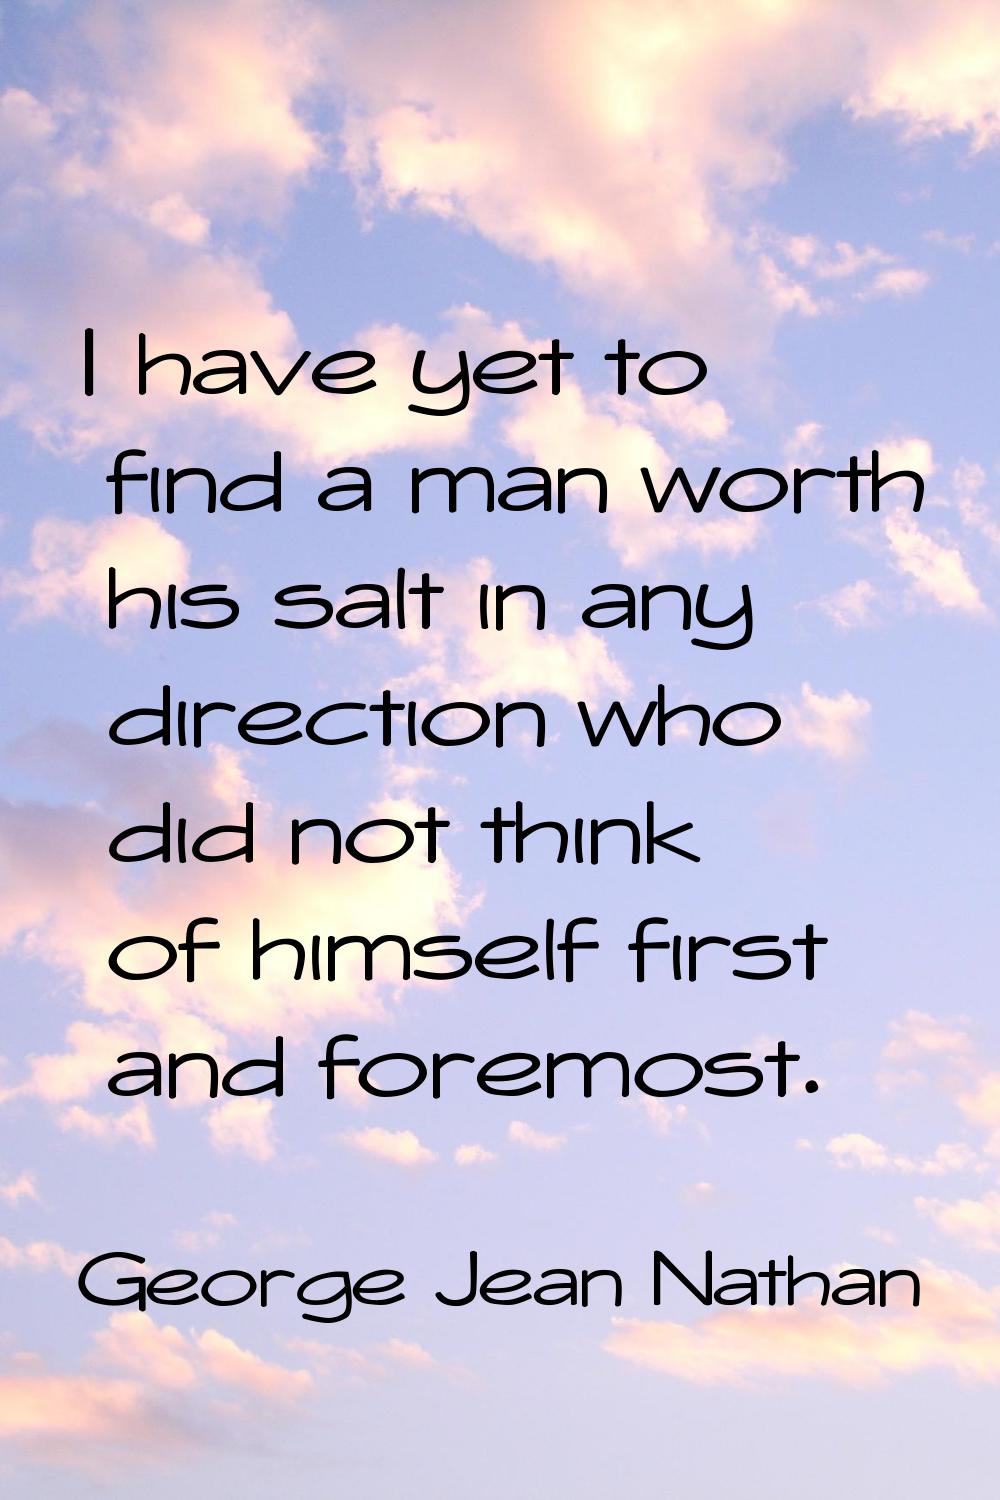 I have yet to find a man worth his salt in any direction who did not think of himself first and for